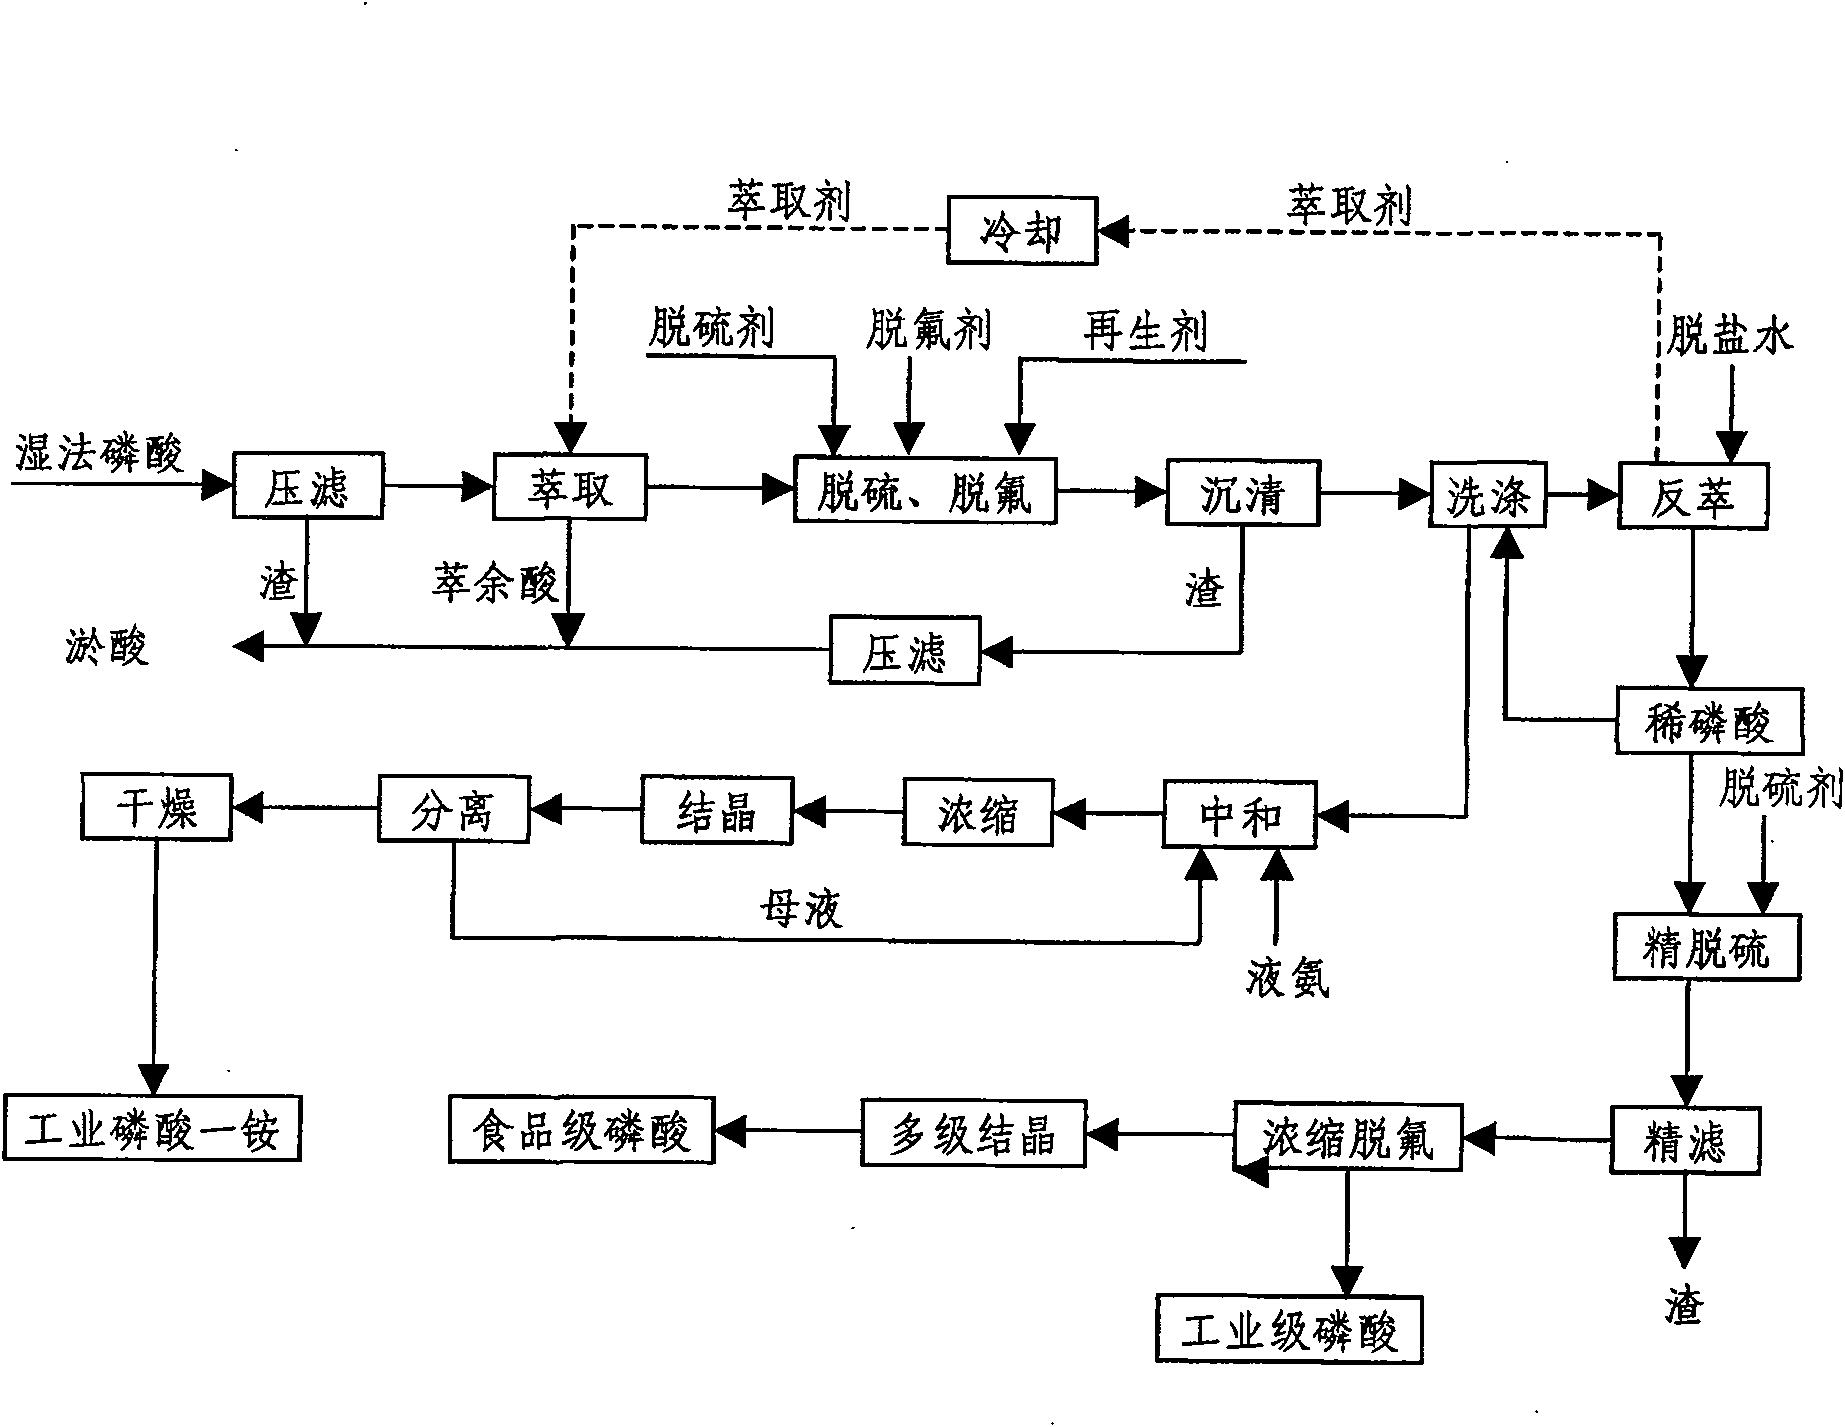 Method for producing technical grade ribose phosphate, food grade ribose phosphate and industry ammonium diacid phosphate using wet-process ribose phosphate